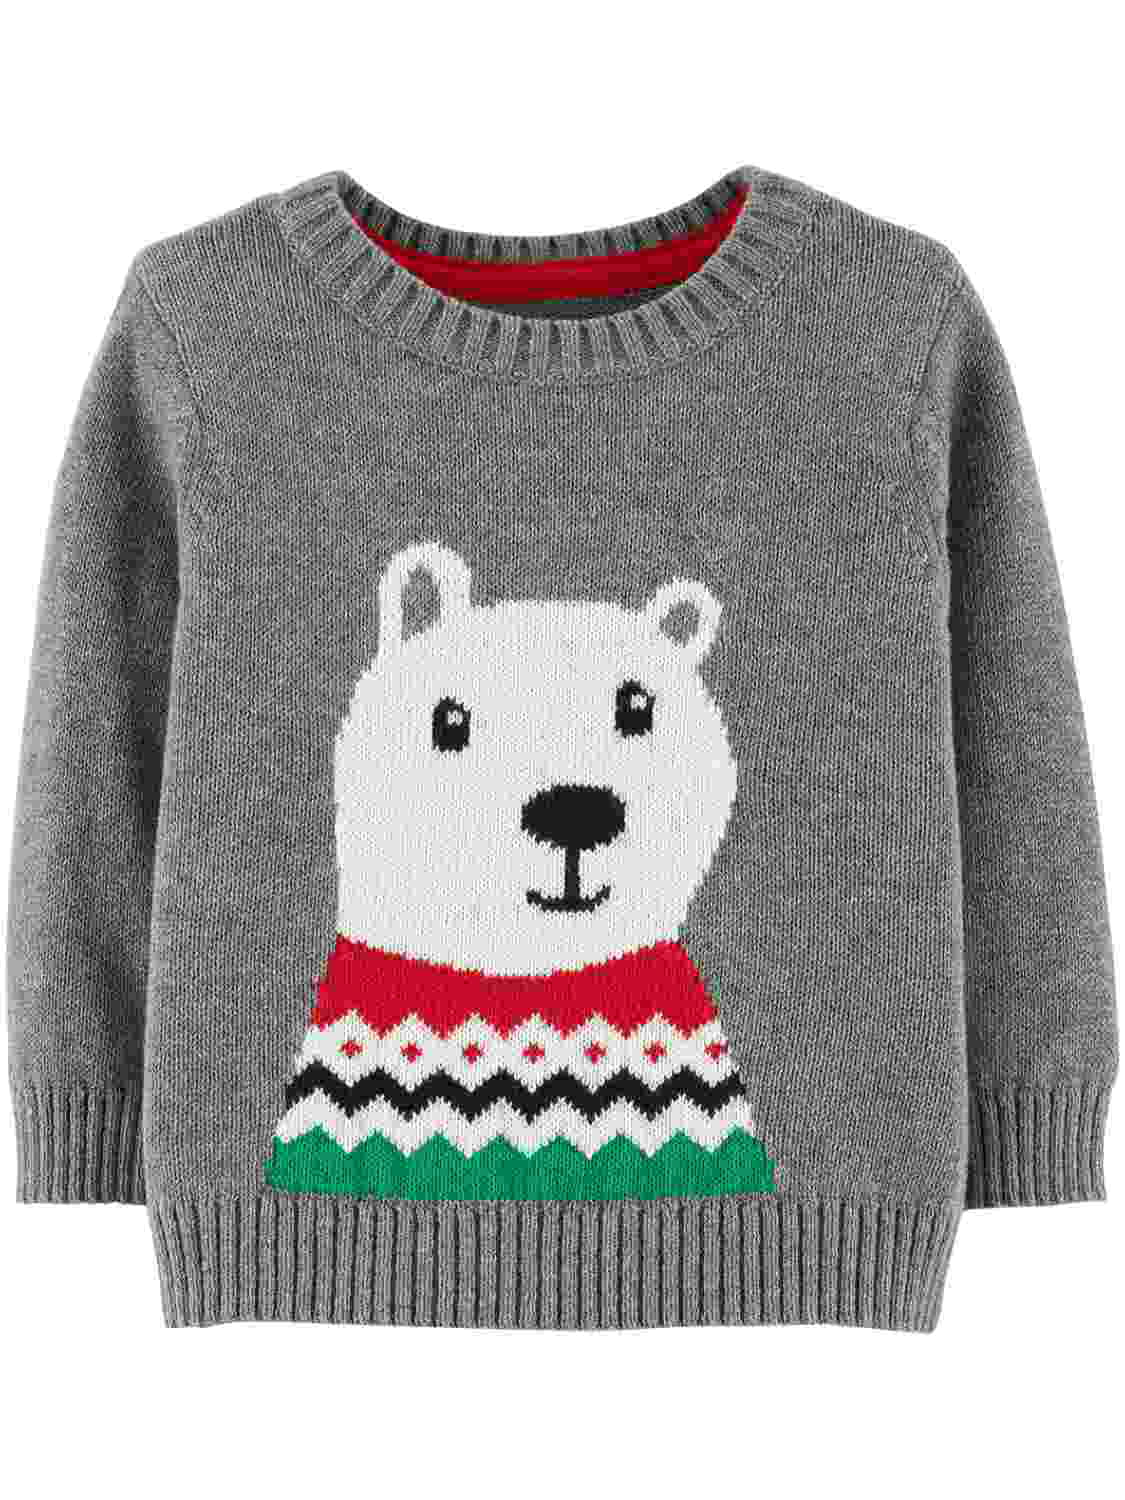 Raptop Toddler Xmas Deer Unisex Baby girl boy Button-up Cotton Sweater Christmas Knitted Cardigan Warm Thick Coat Clothes